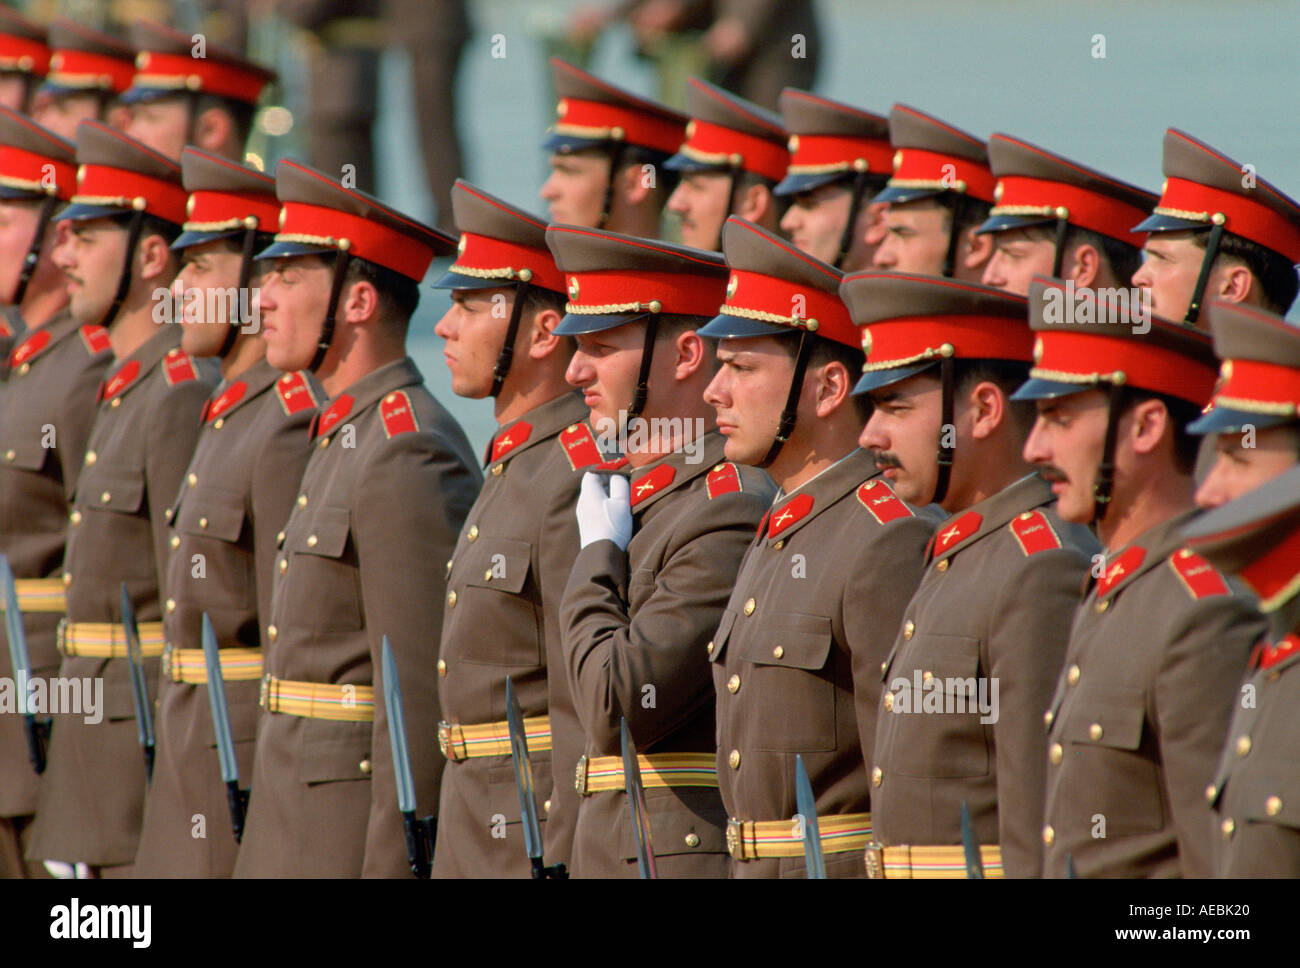 Army on parade in Hungary Stock Photo